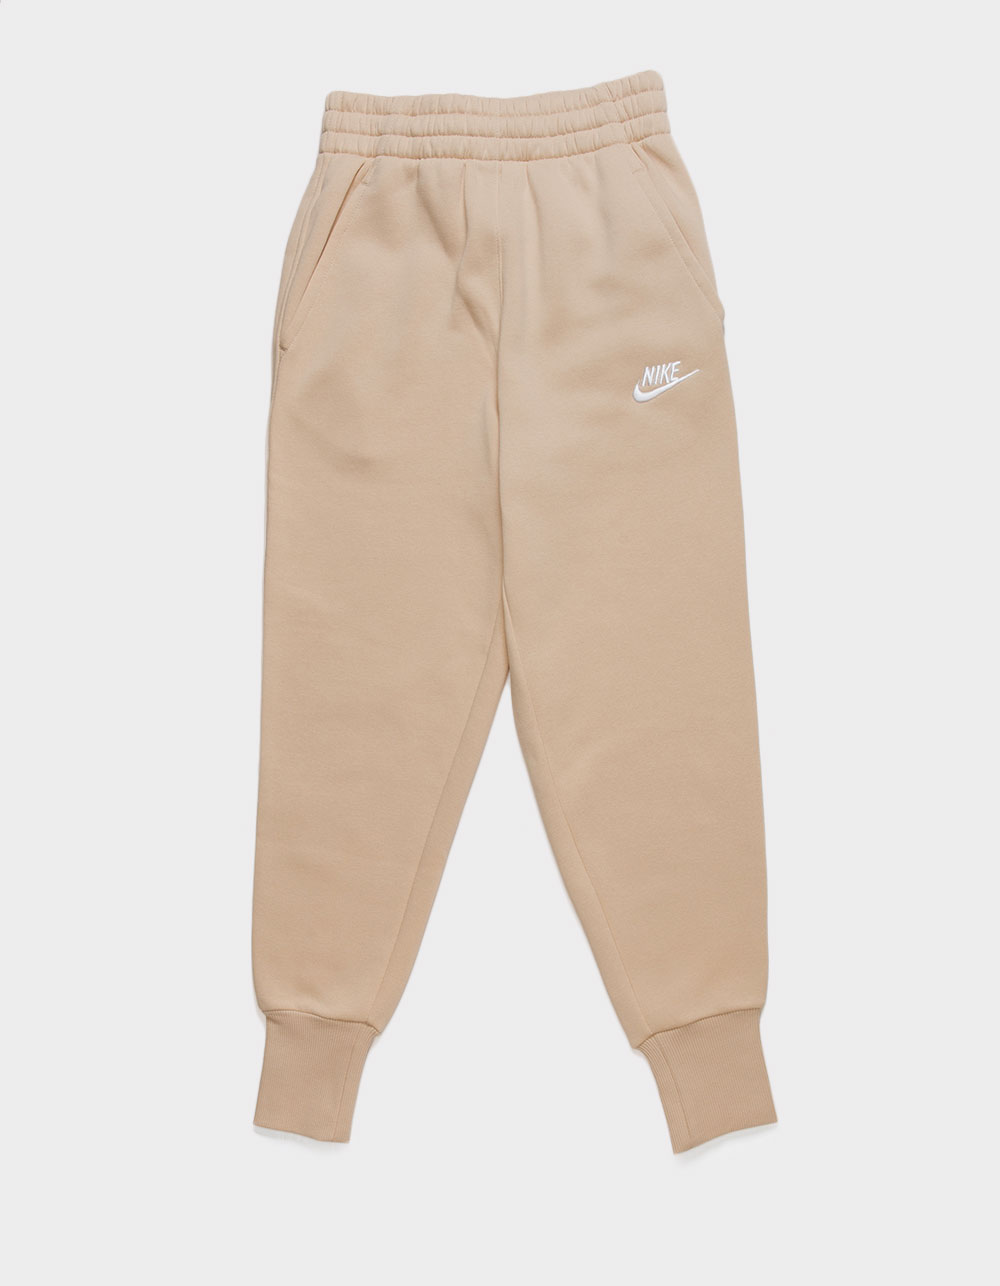 NIKE Casual Pants Girl 9-16 years online on YOOX United States